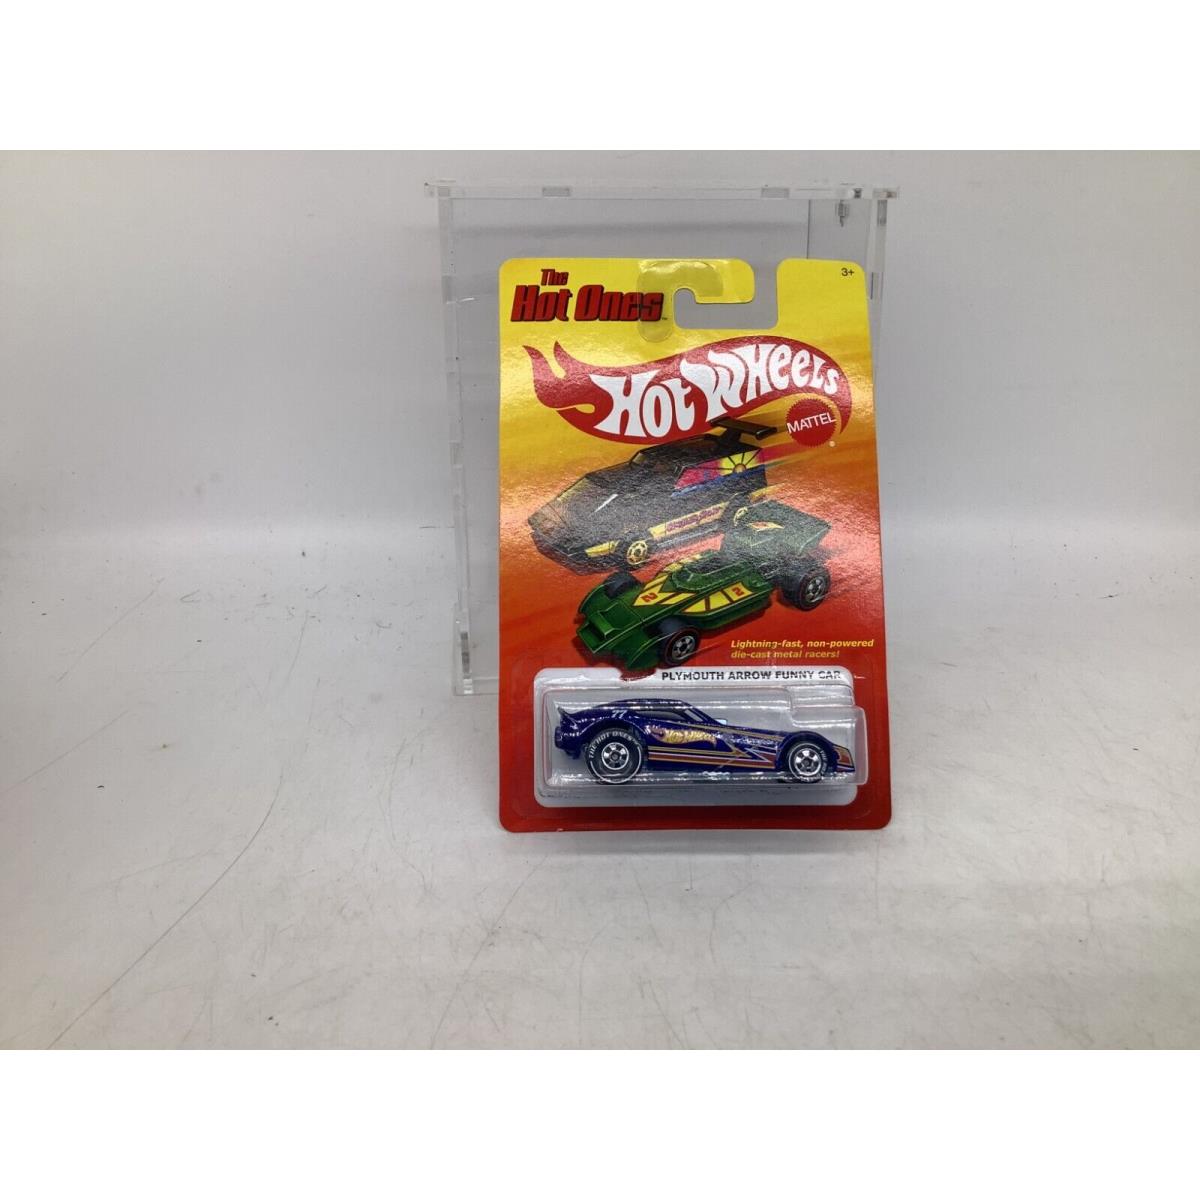 Hot Wheels The Hot Ones Plymouth Arrow Funny Car Chase 1:64 Scale Diecast